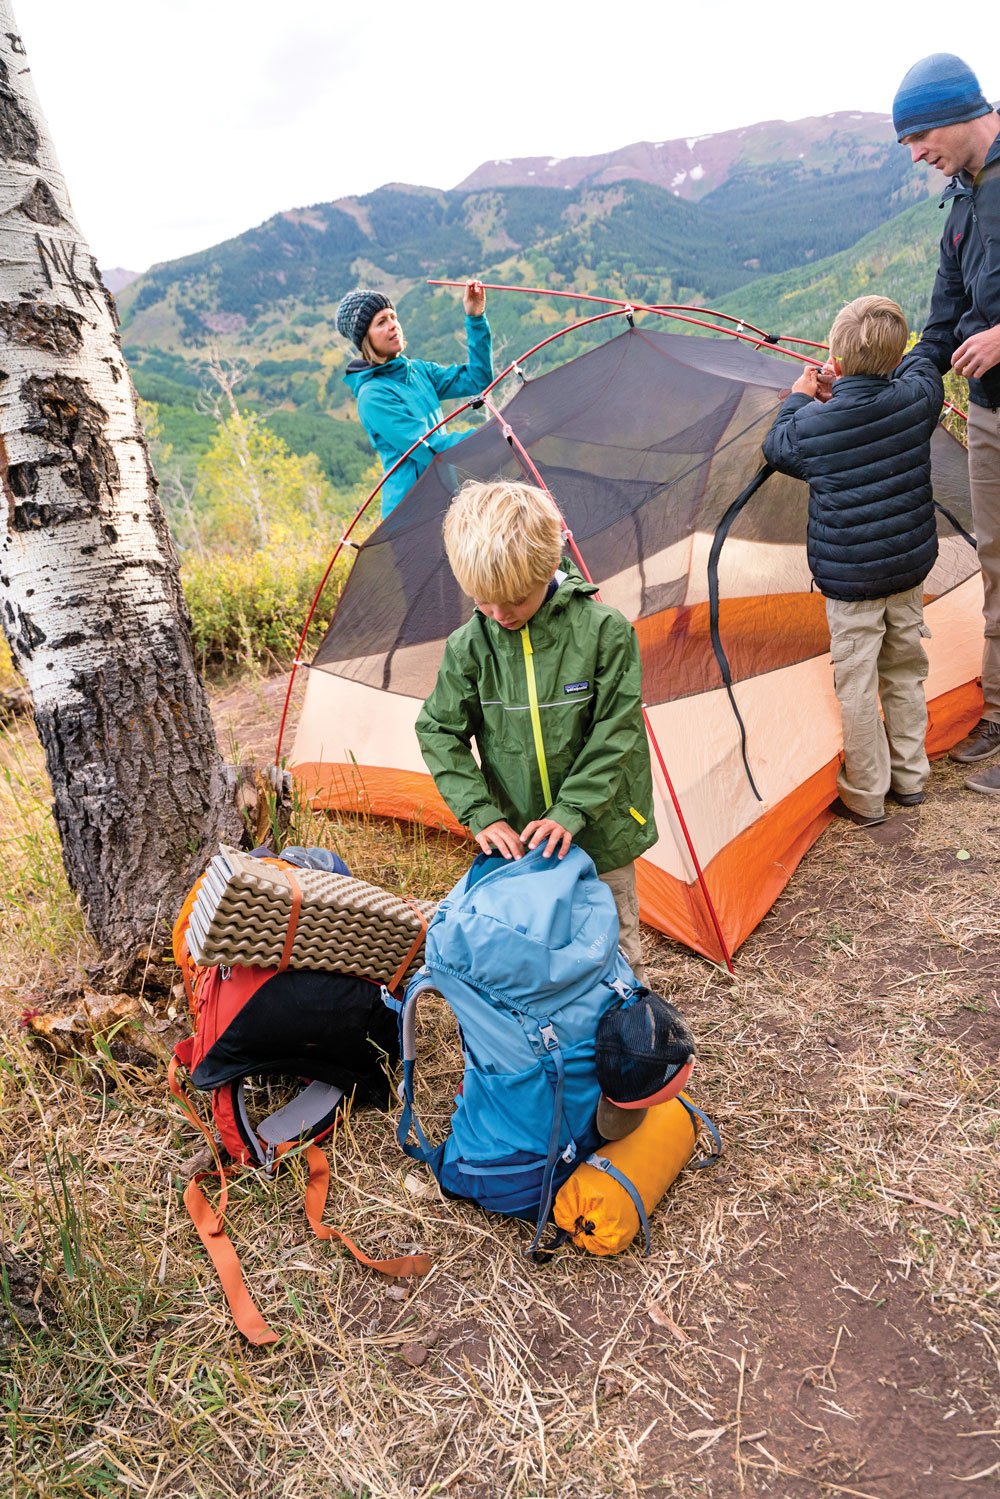 Putting the camping tent together as family